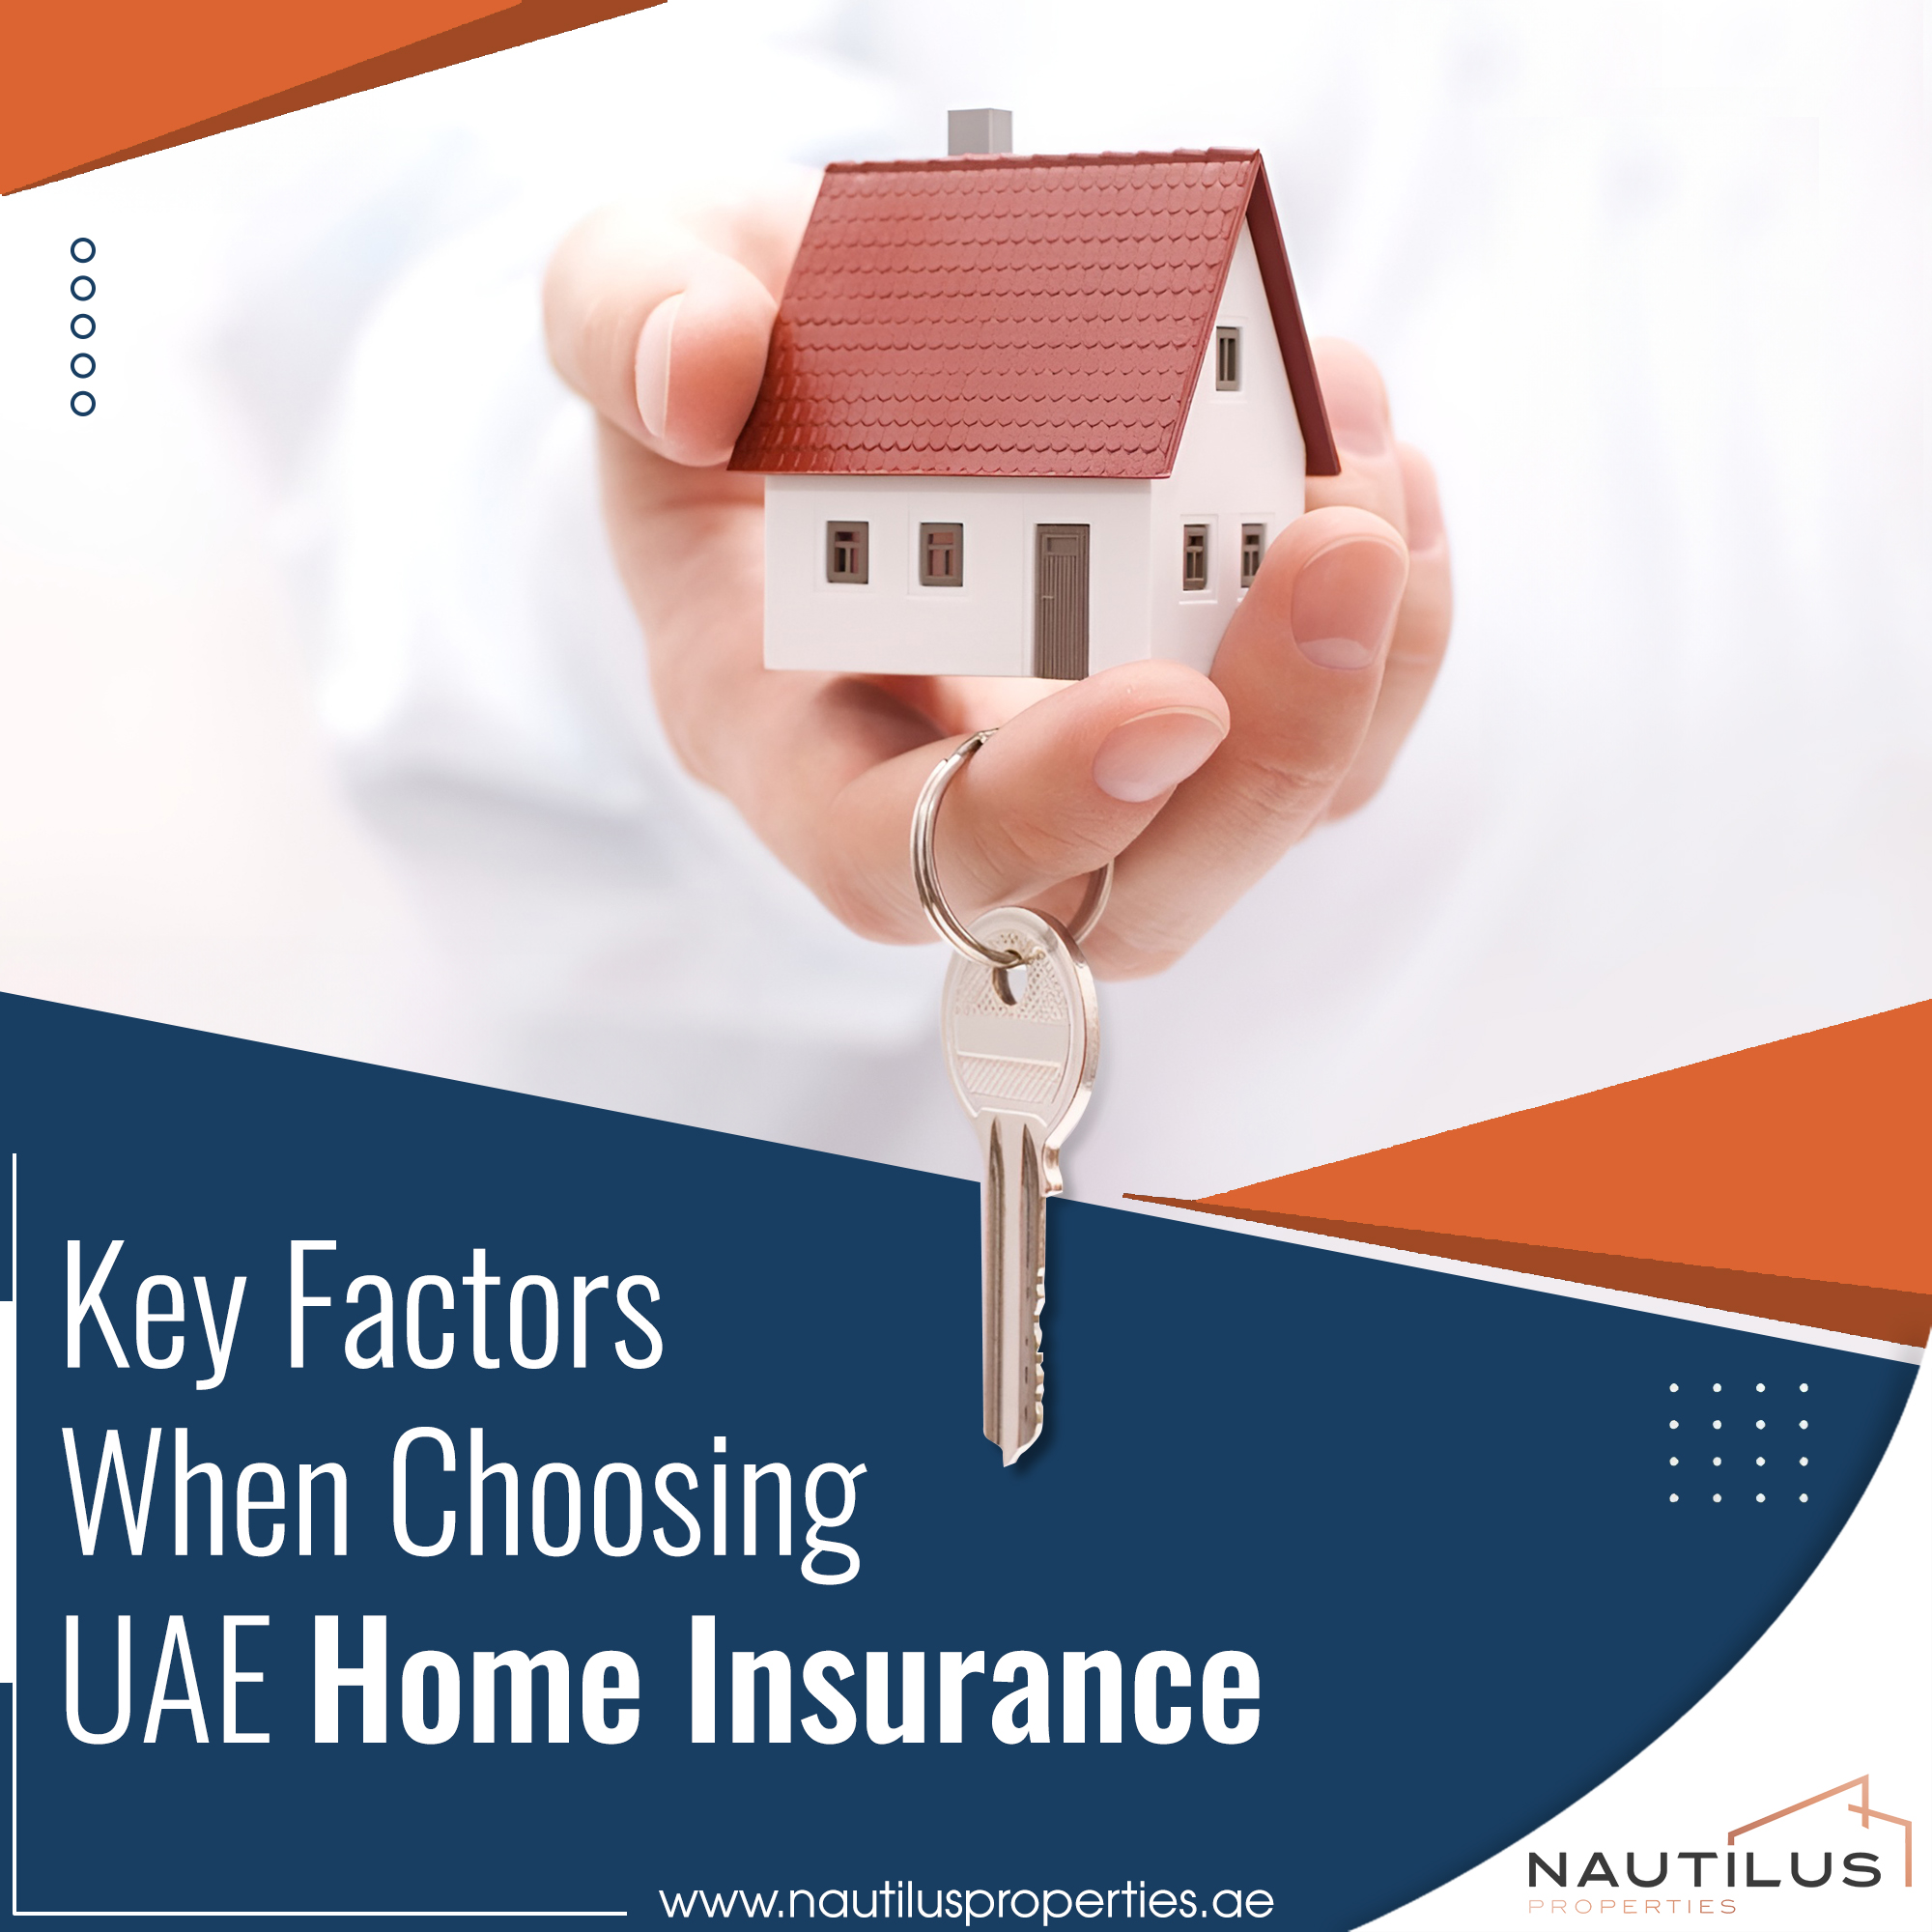 A hand holding a model house and key, representing key factors when choosing UAE home insurance.